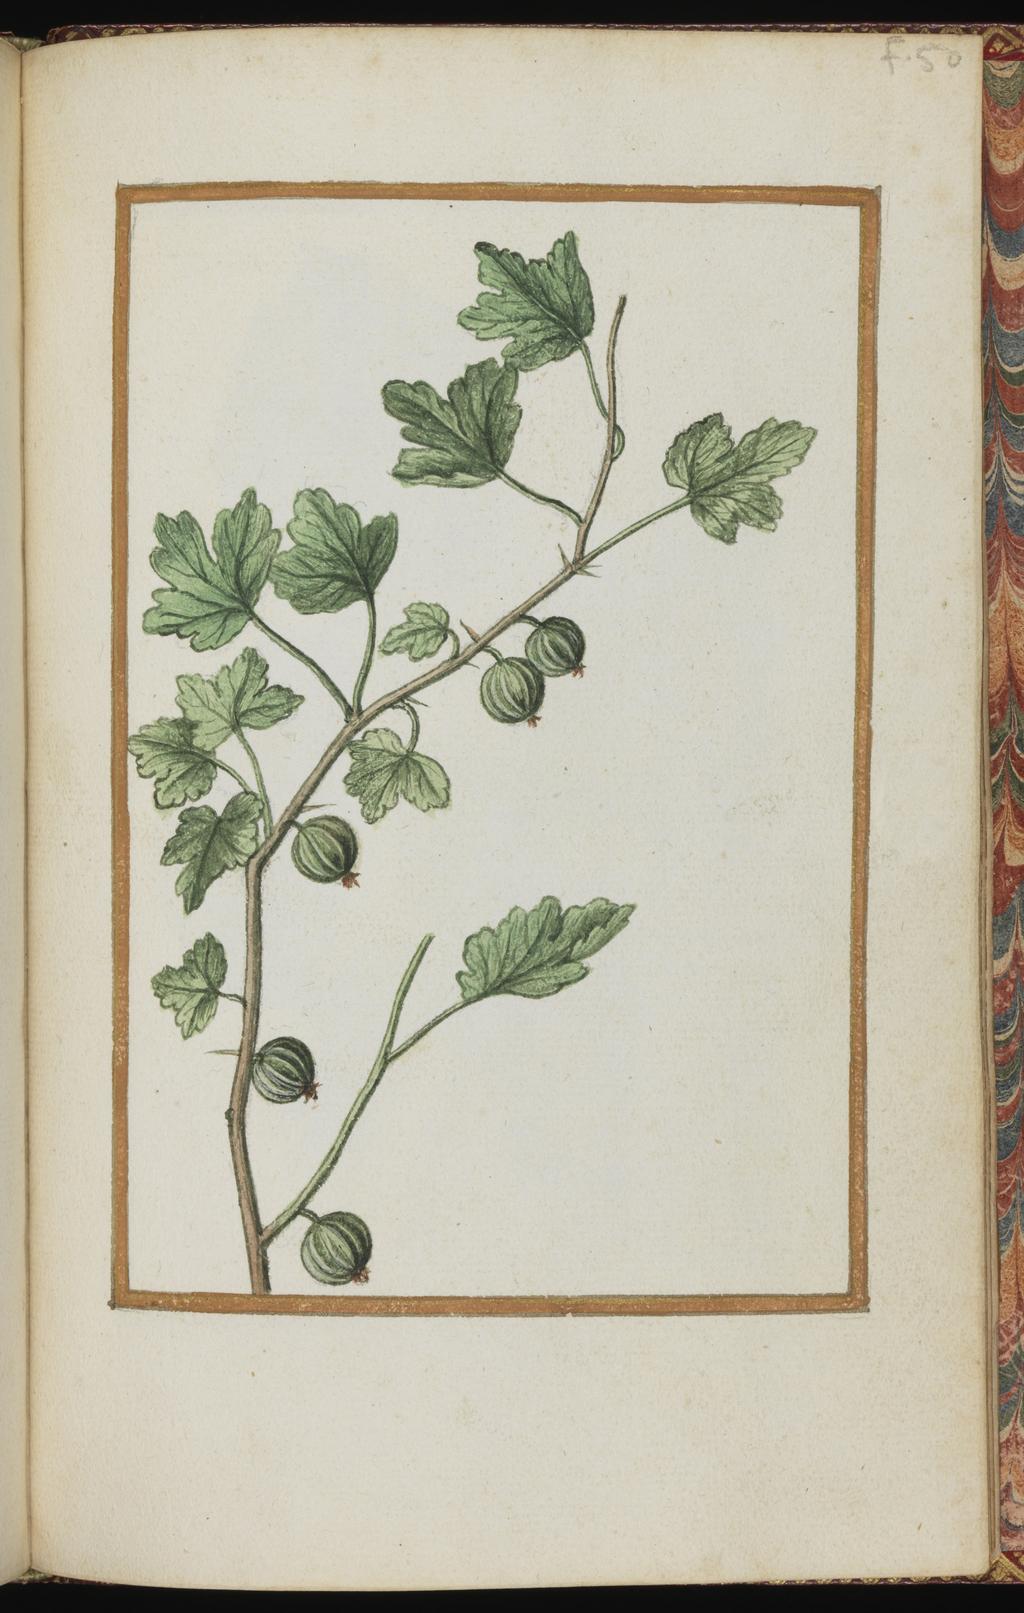 An image of Gooseberry. Album containing a dedicatory sonnet and 48 drawings. Pinet, Antoine du (French, op. c. 1584). Each of the drawings is framed by a border of gold paint of varying size according to the depth of the painted area. The drawings on white laid paper, watermarked with a bunch of grapes are bound into an album with a contemporary gold-tooled limp vellum cover bearing the arms, recto and verso of Louise of Lorraine (1553-1601). This, in turn, is bound into an eighteenth century French red morocco gilt binding. The spine is lettered in gold (see 'inscriptions/marks'). Each of the drawings is framed by a border of gold paint of varying size according to the depth of the painted area. Blank ff not detailed elsewhere. Height, sheet size, 204 mm, width, sheet size, 139 mm.